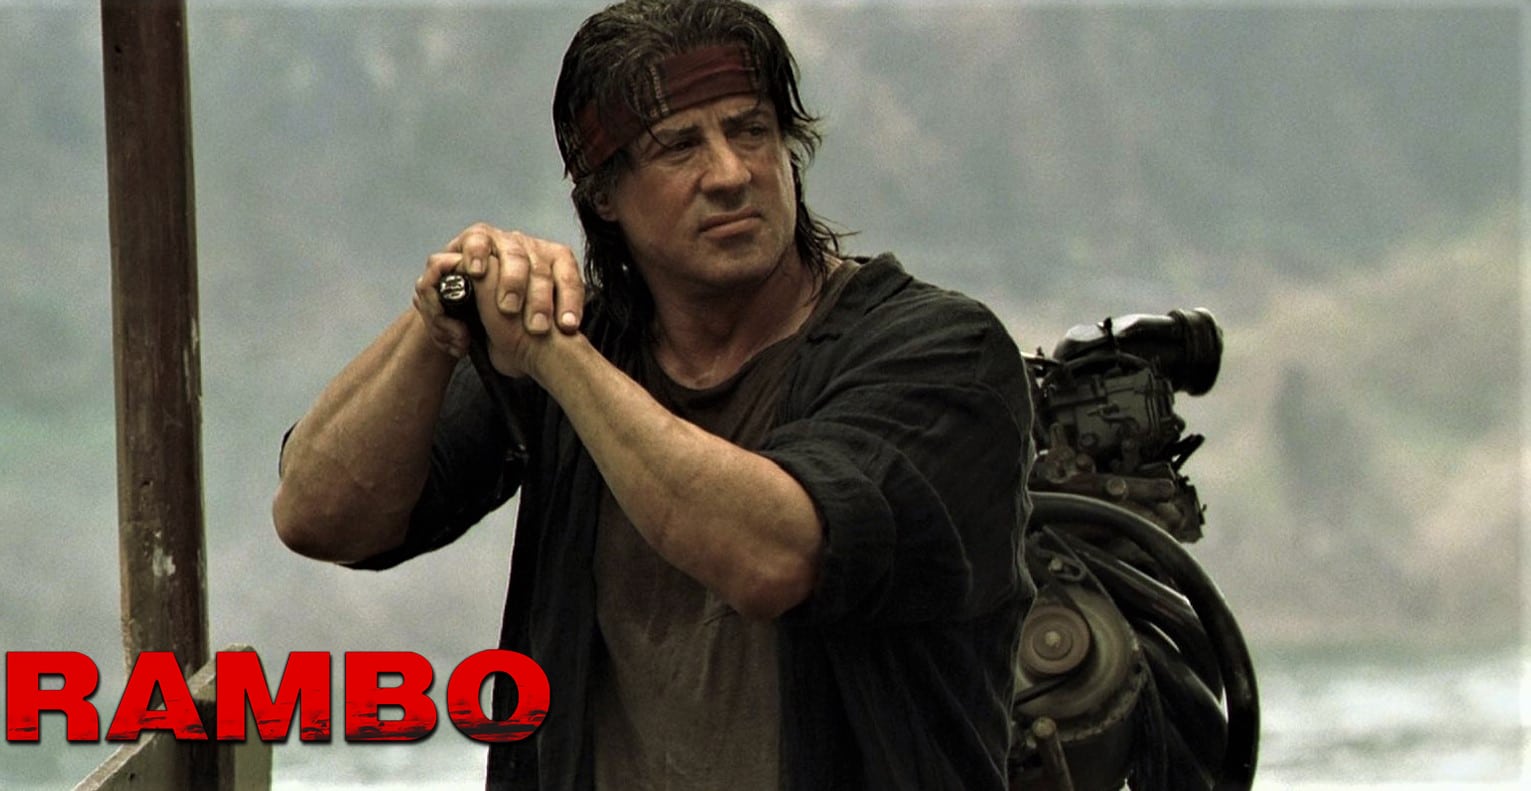 New ‘Rambo’ Film Teased By Sylvester Stallone